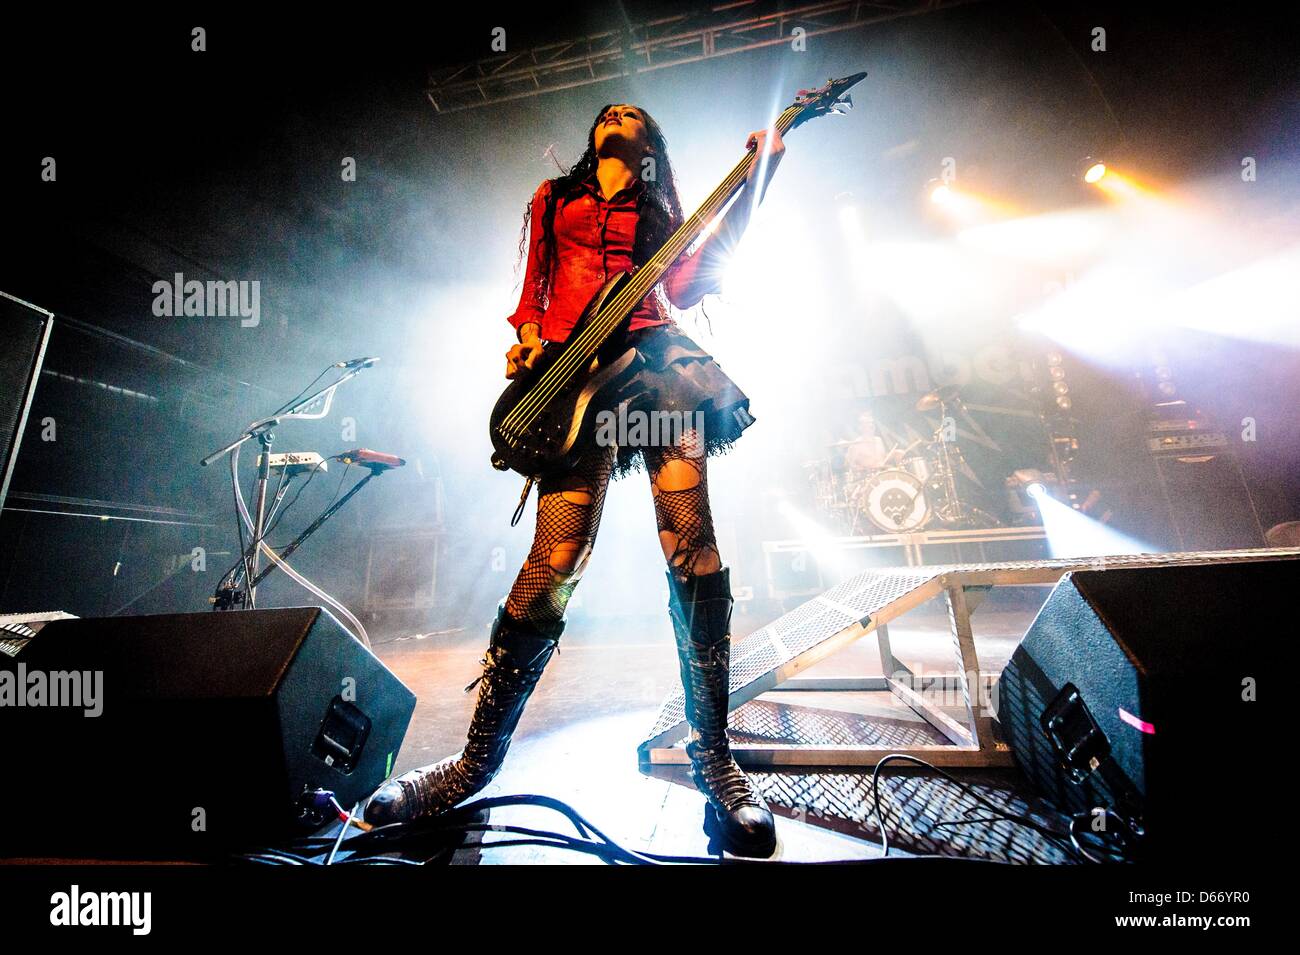 April 13, 2013 - Toronto, Ontario, Canada - Bassist CHELA RHEA HARPER performs on stage with American nu metal band 'Coal Chamber' at Sound Academy in Toronto. (Credit Image: © Igor Vidyashev/ZUMAPRESS.com) Stock Photo